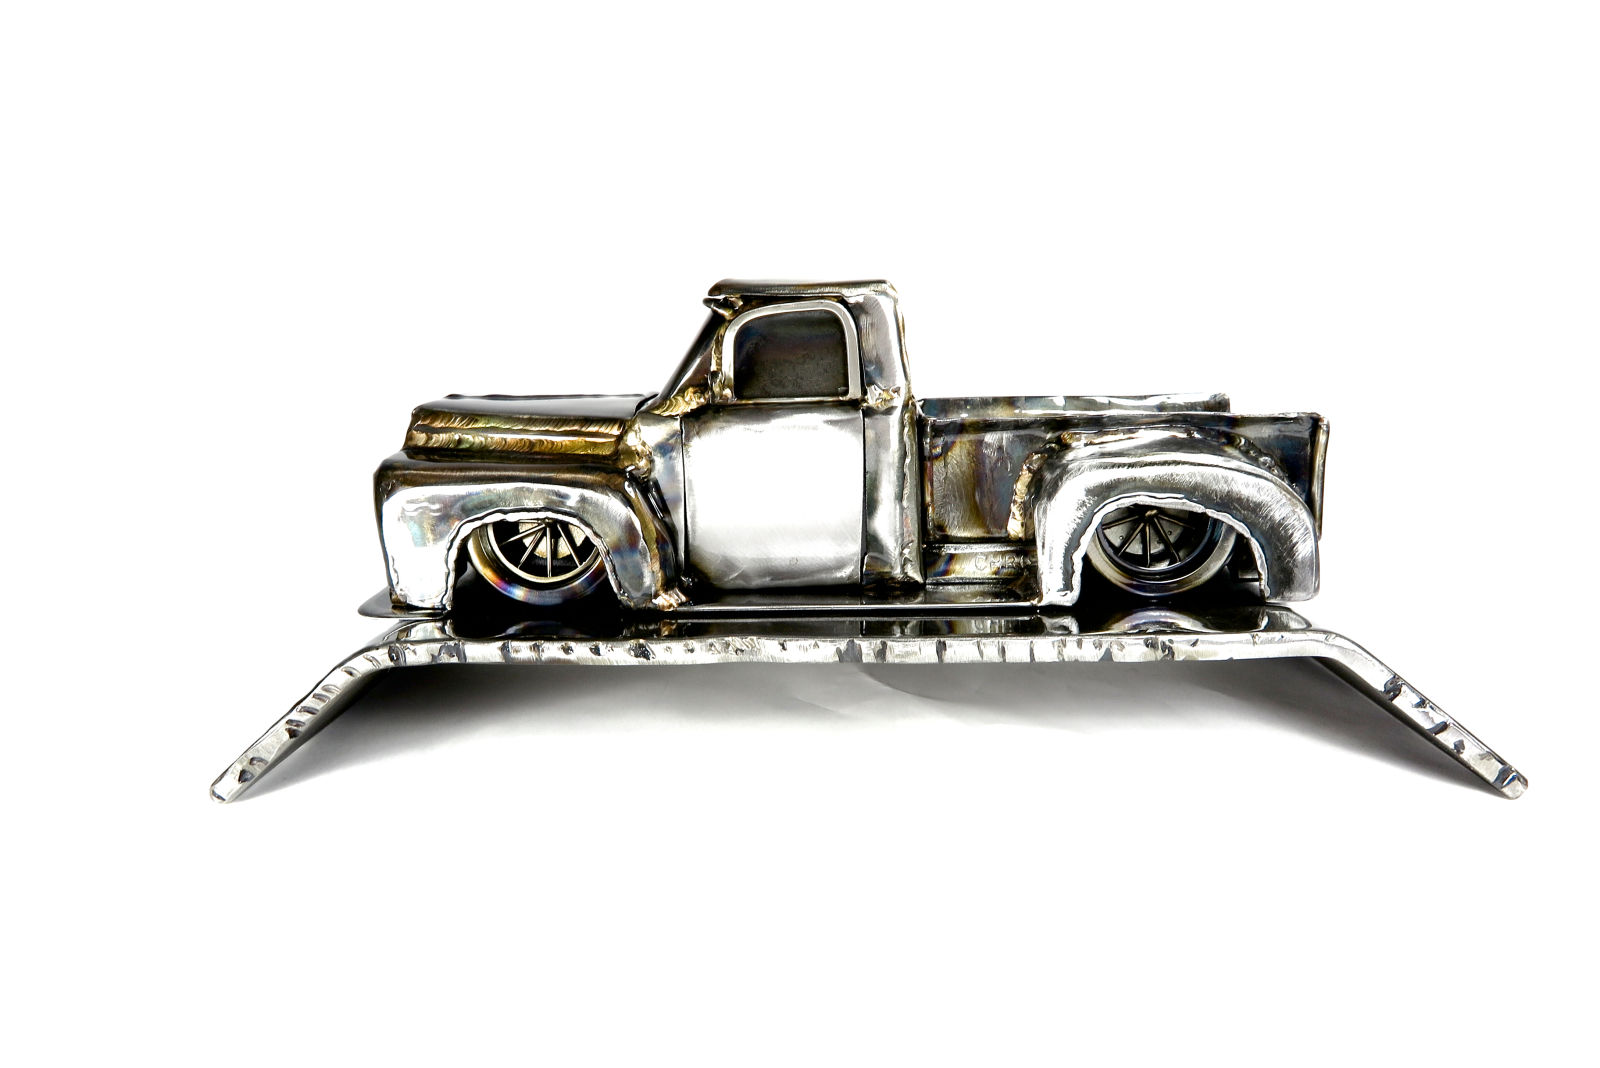 Illustration for article titled 1956 Ford F100, First Automotive Sculpture of the Year